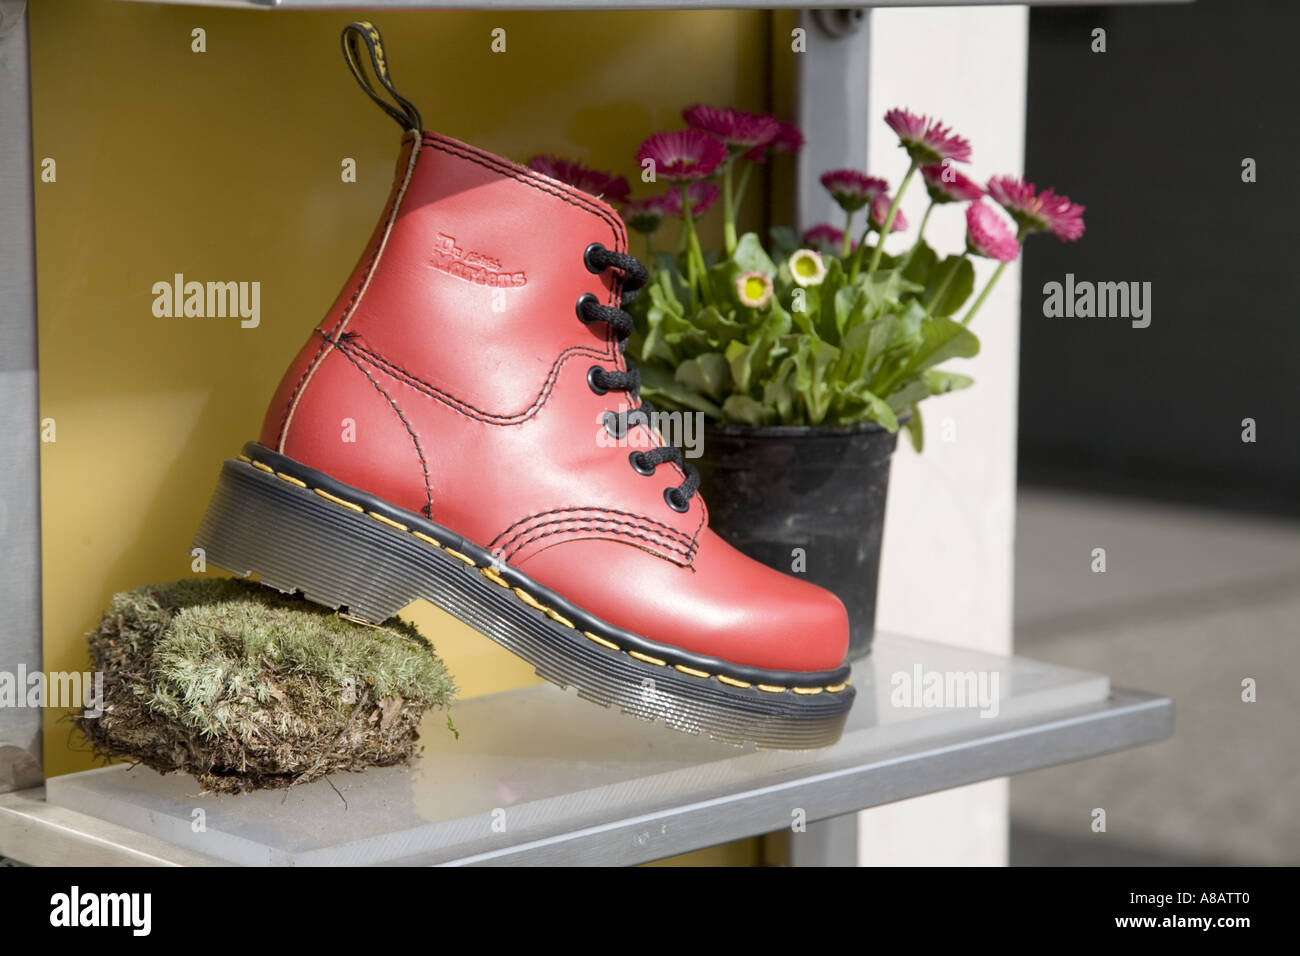 Dr Martens on display, Berlin, Germany Stock Photo